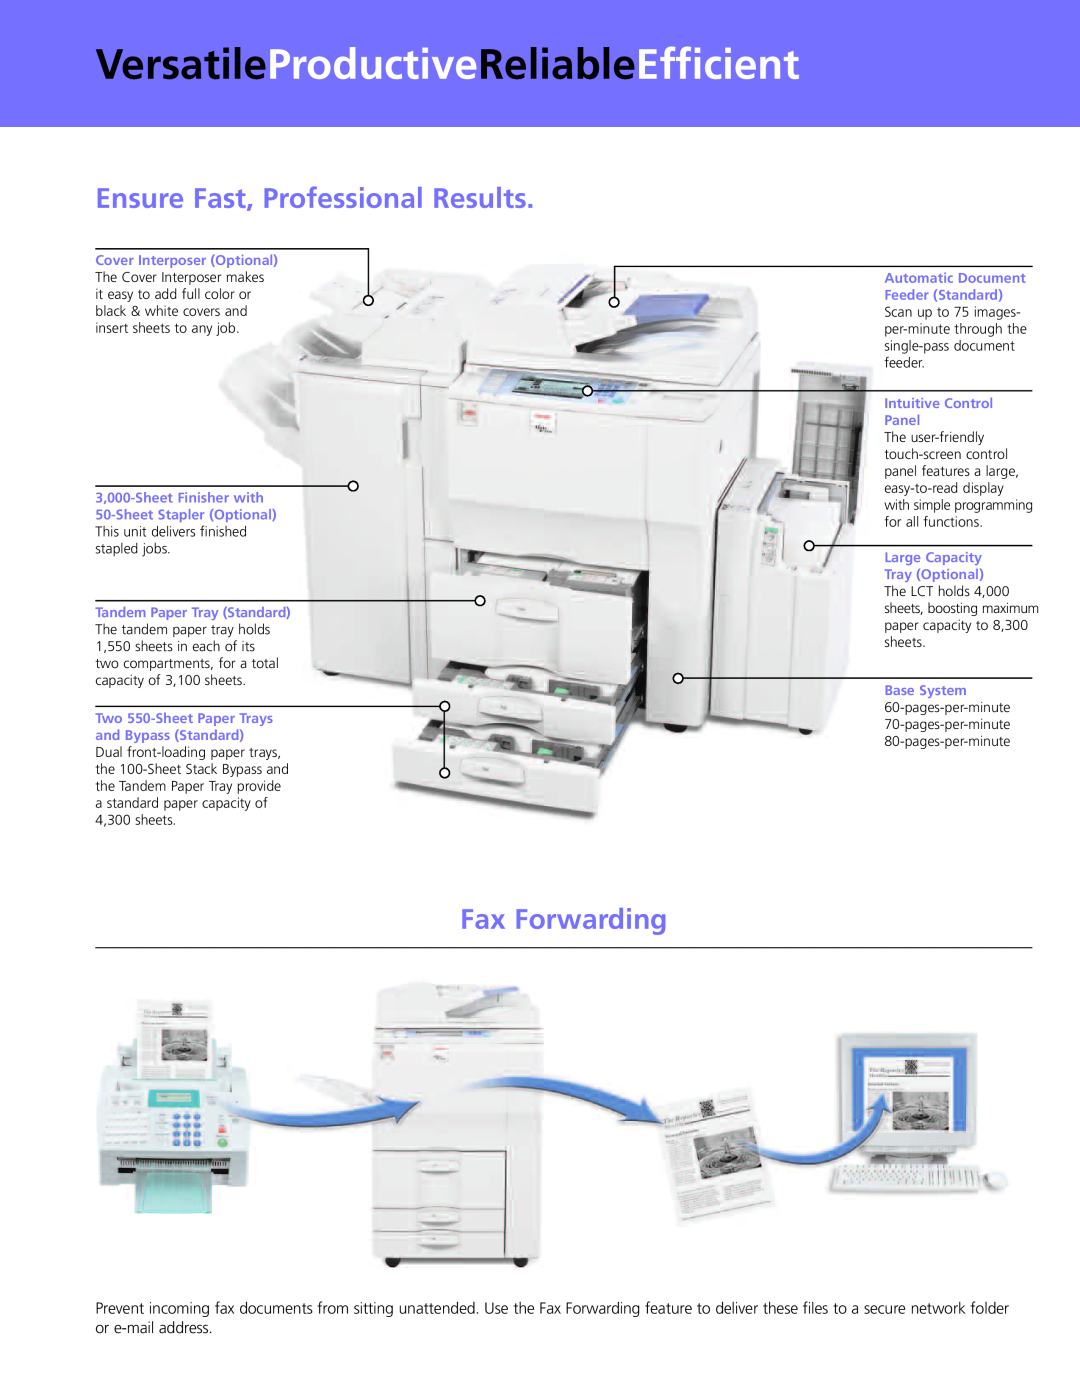 Ricoh MP 7000, MP 8000 manual VersatileProductiveReliableEfficient, Ensure Fast, Professional Results, Fax Forwarding 